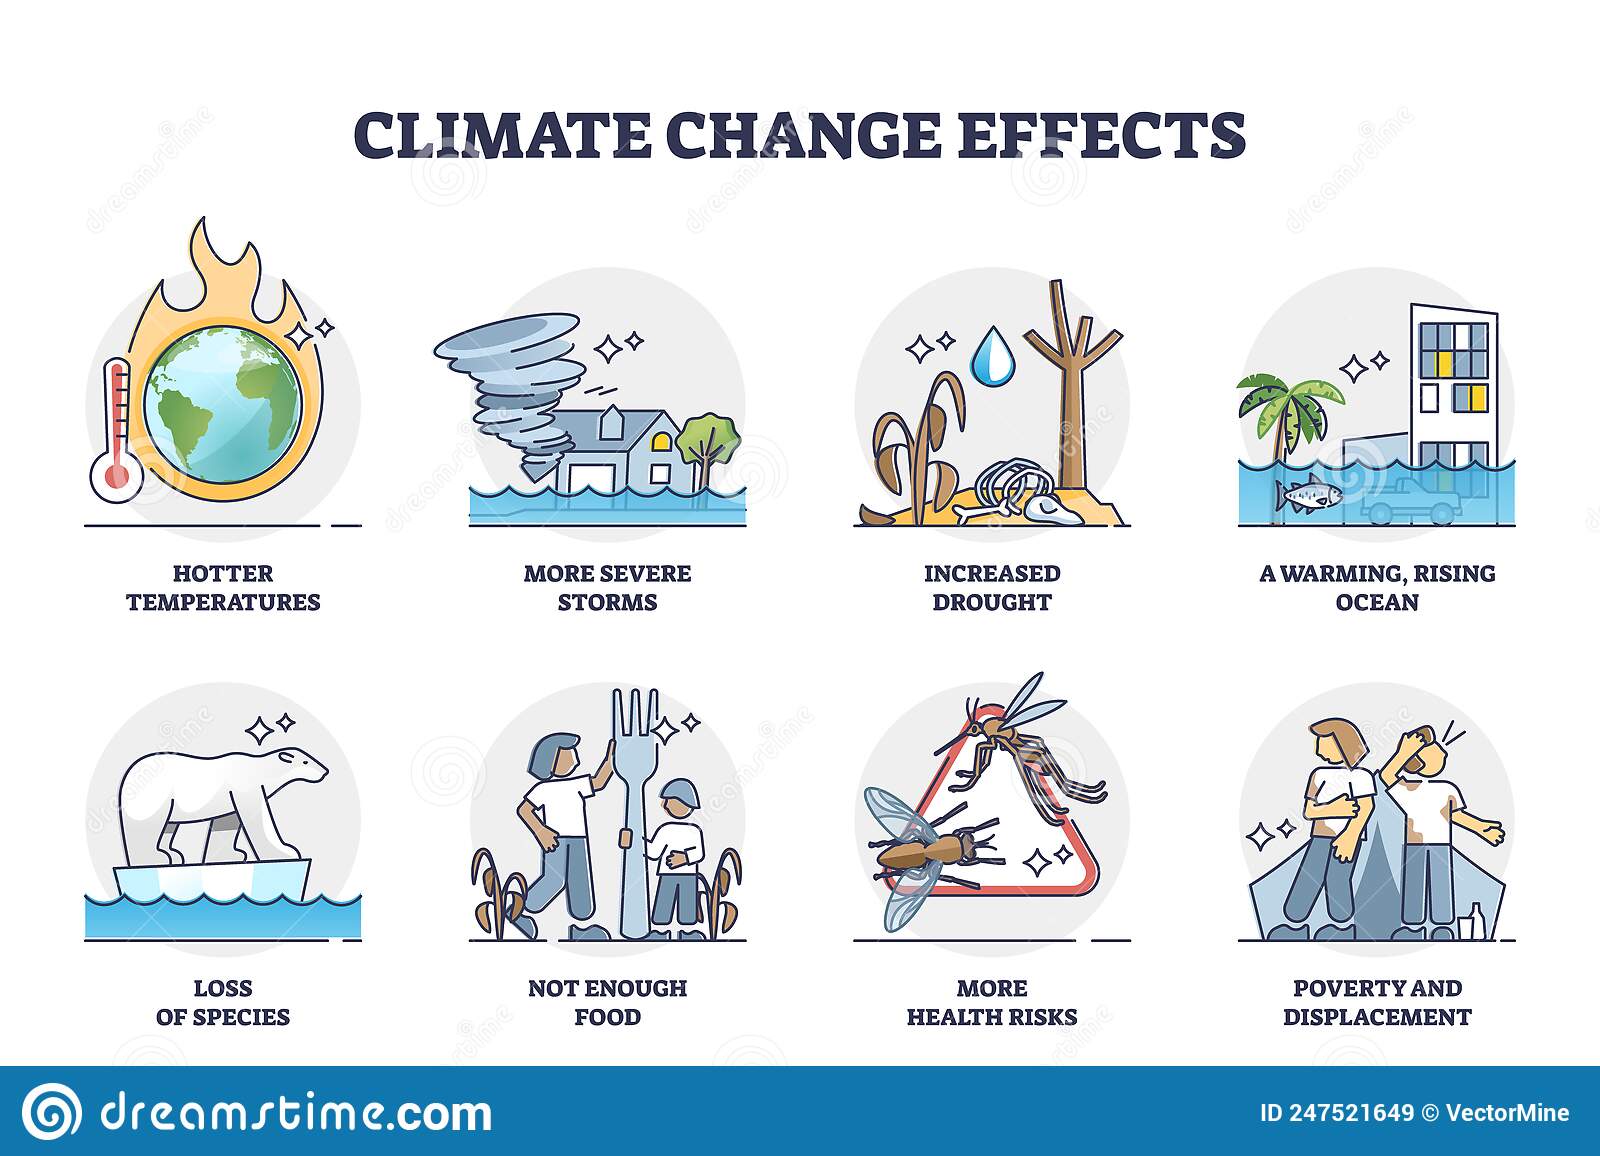 When climate change occurs, everyone suffers the consequences.